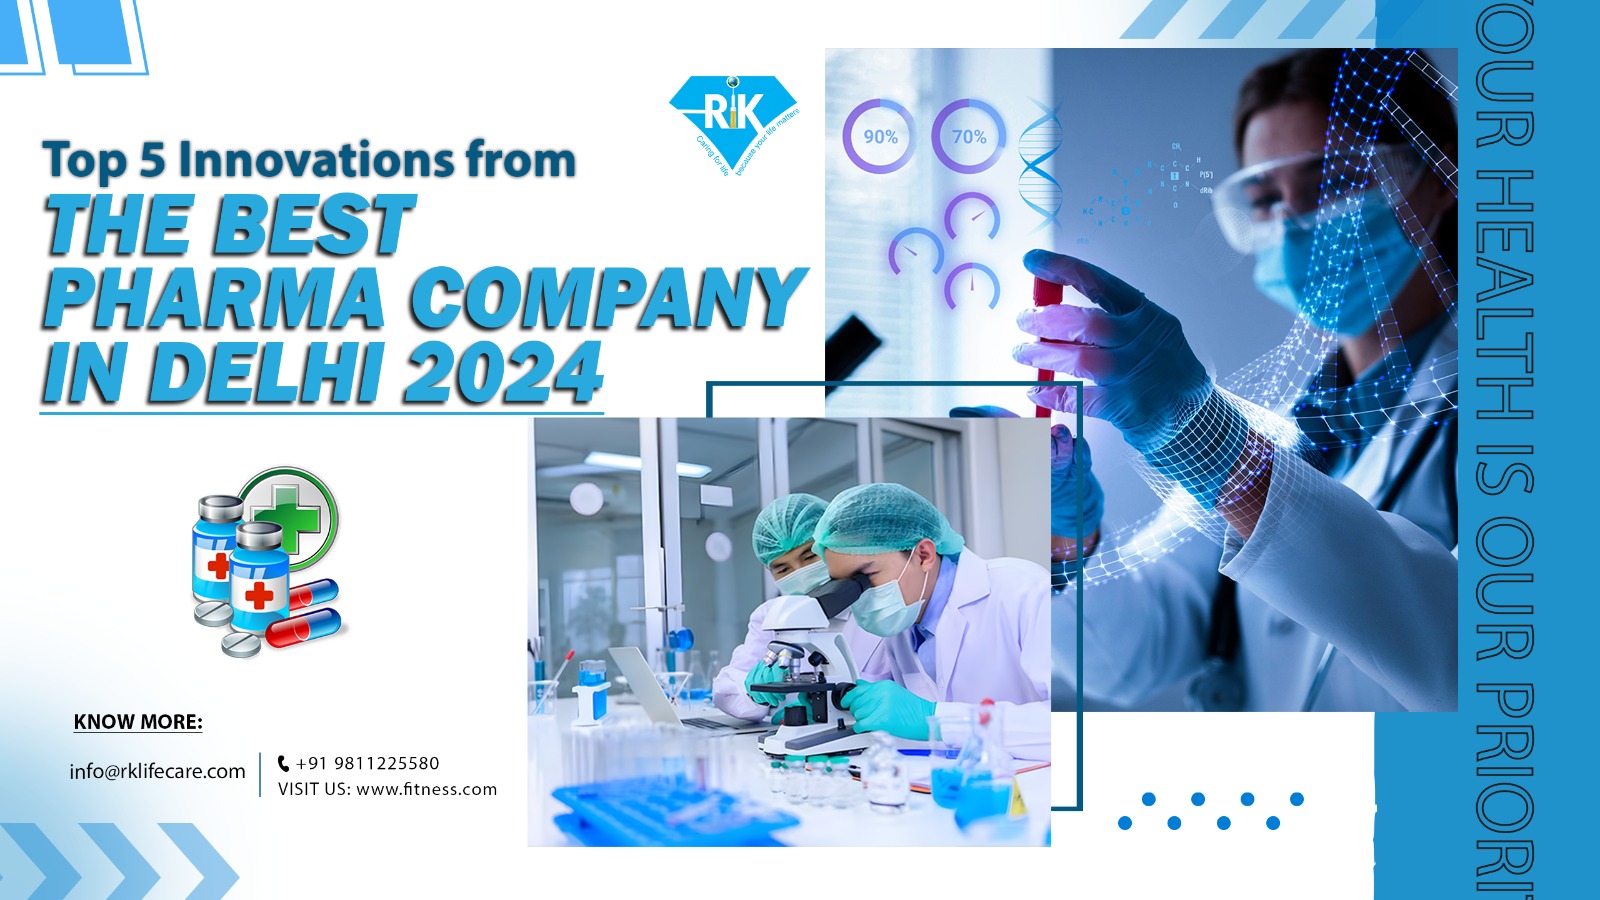 Top 5 Innovations from the Best Pharma Company in Delhi 2024